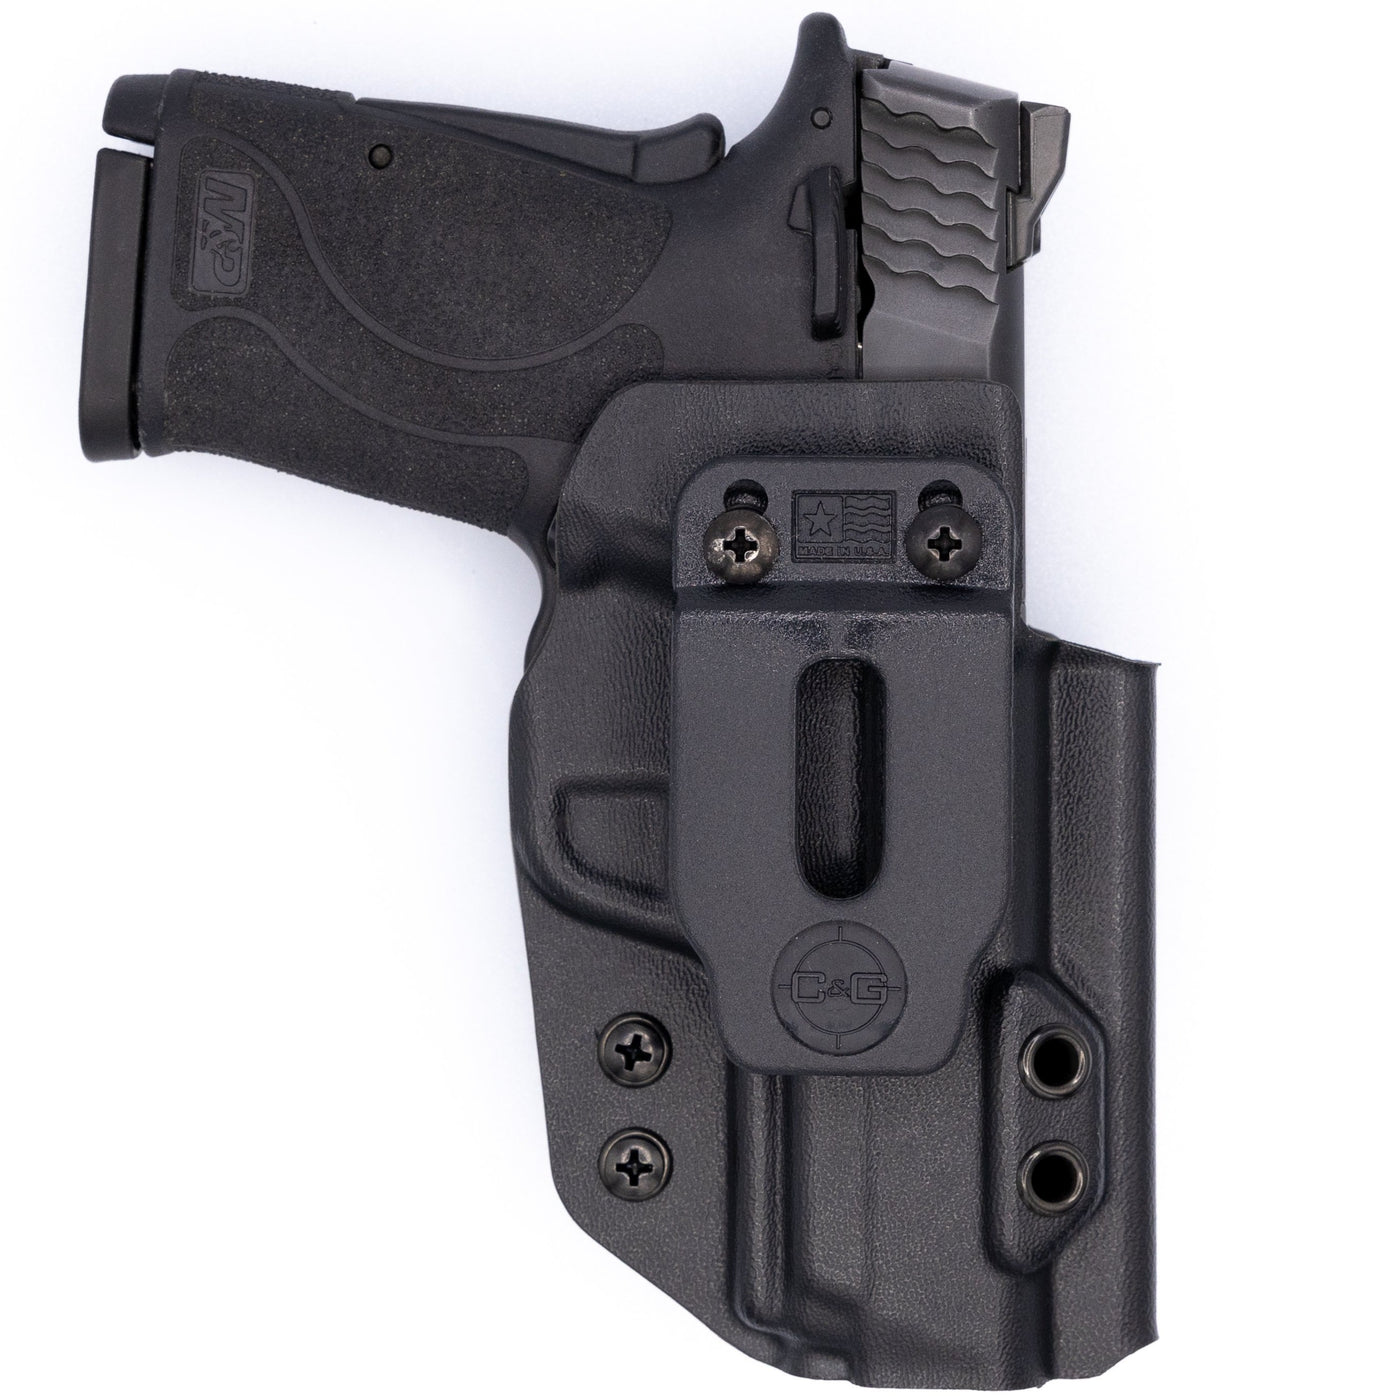 This is a C&G Holsters Covert series Inside the Waistband Smith & Wesson M&P Shield 9EZ with the firearm showing a front view.